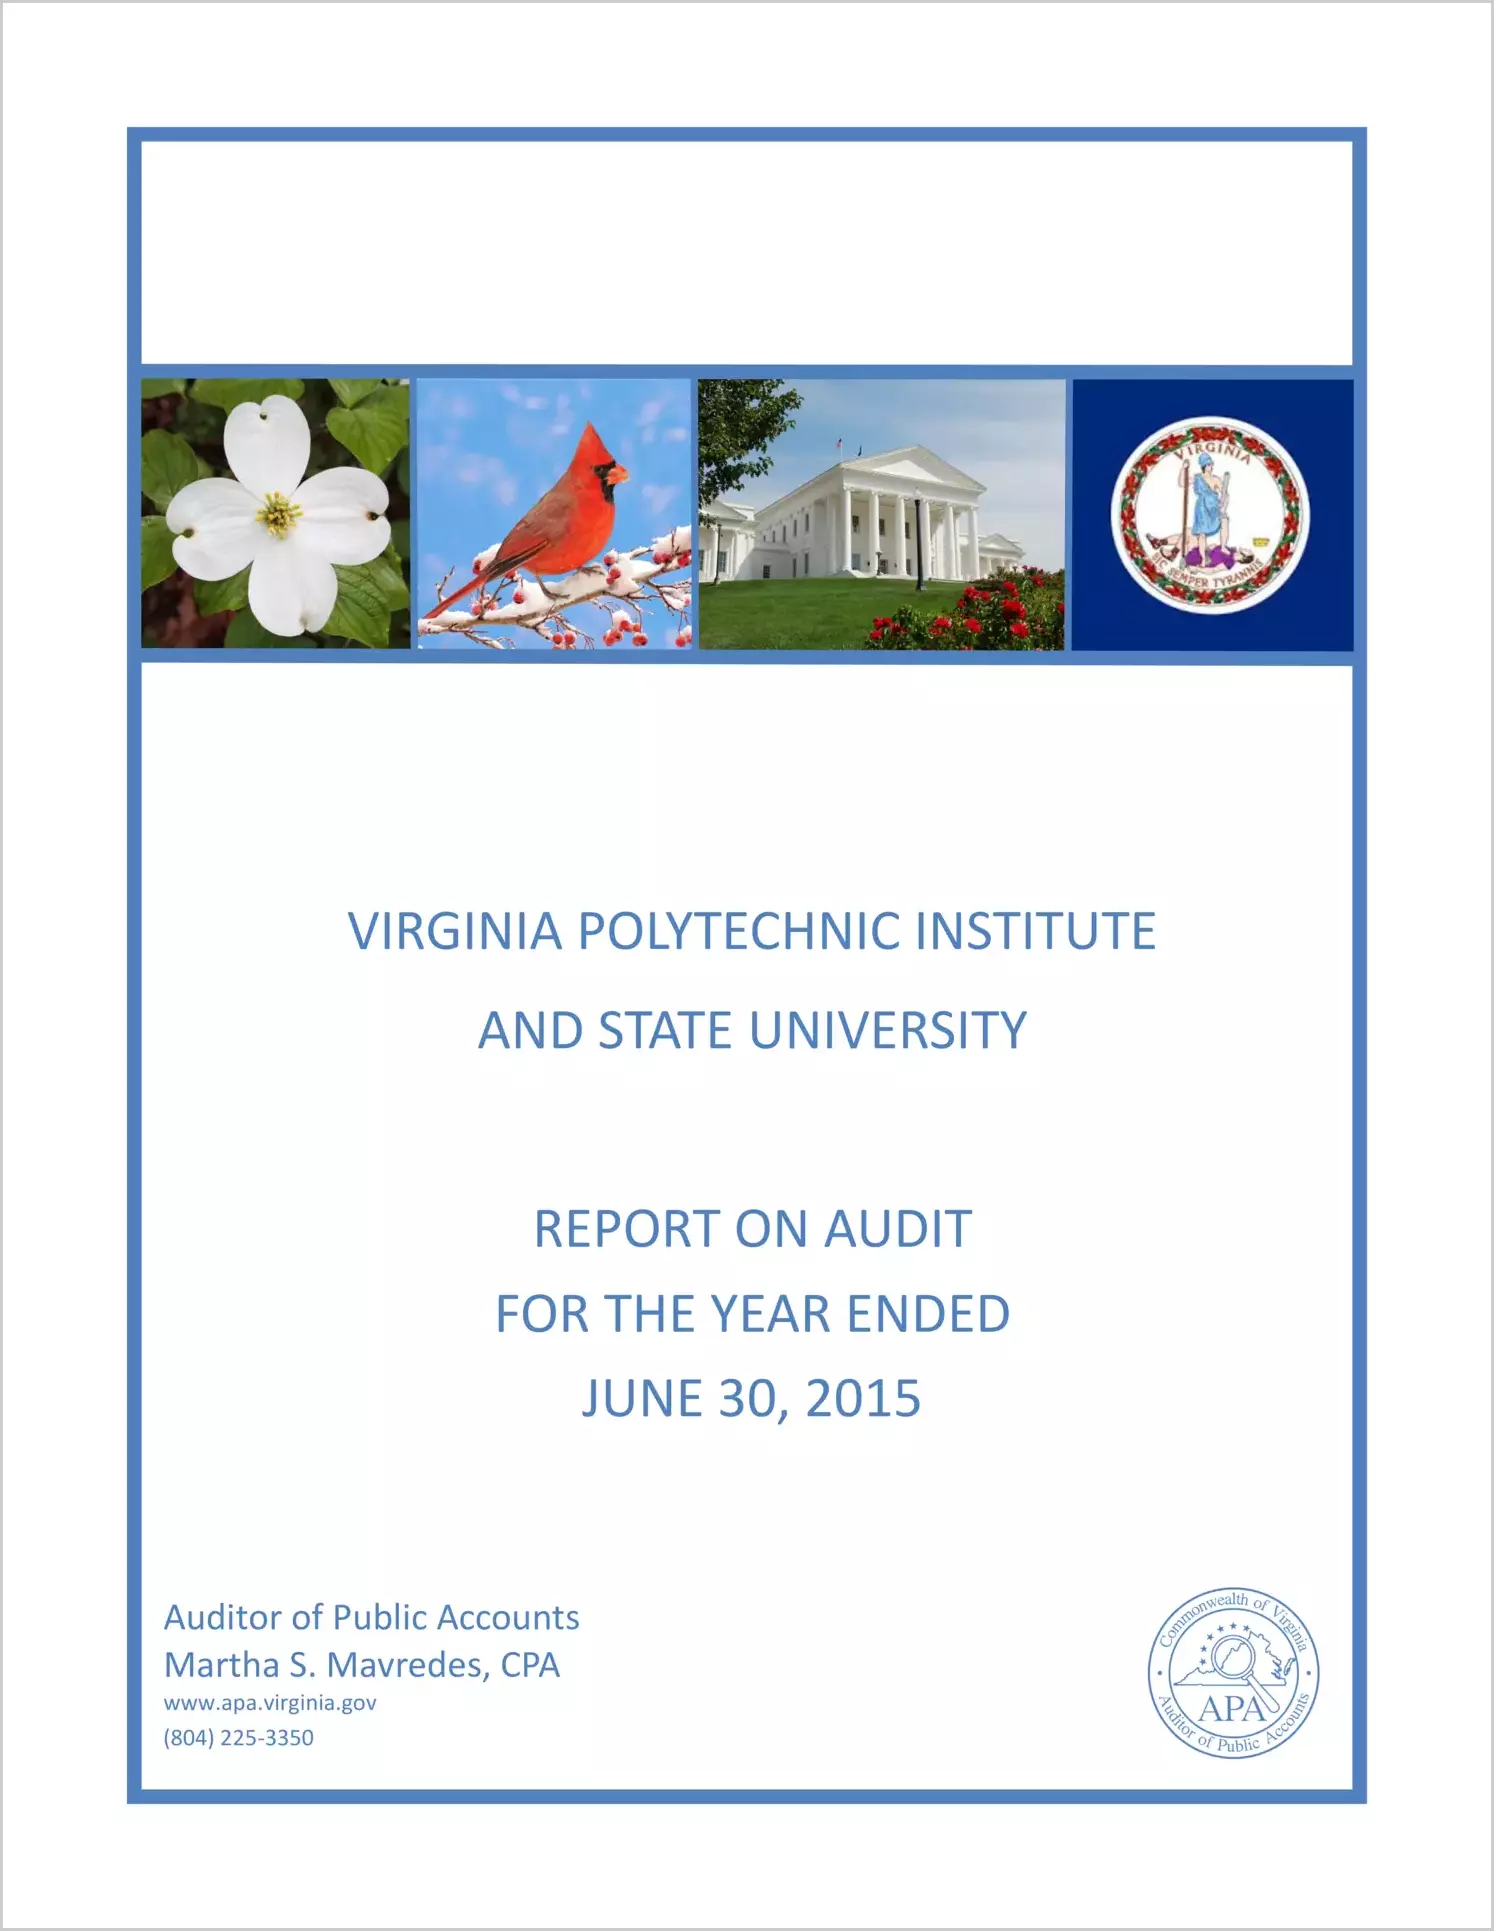 Virginia Polytechnic Institute and State University for the year ended June 30, 2015